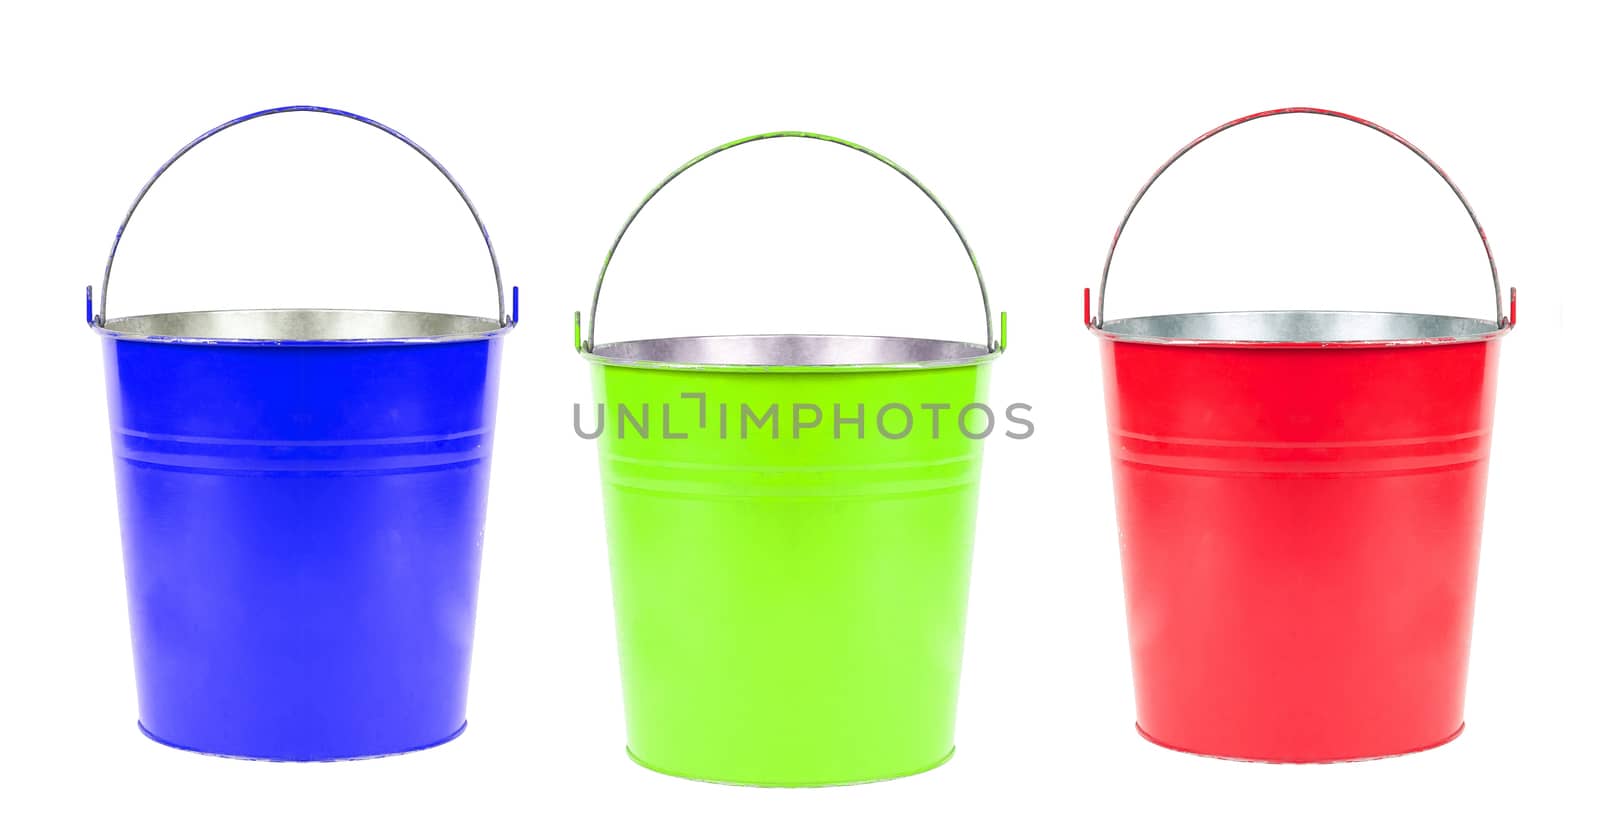 blue, green, red buckets isolated